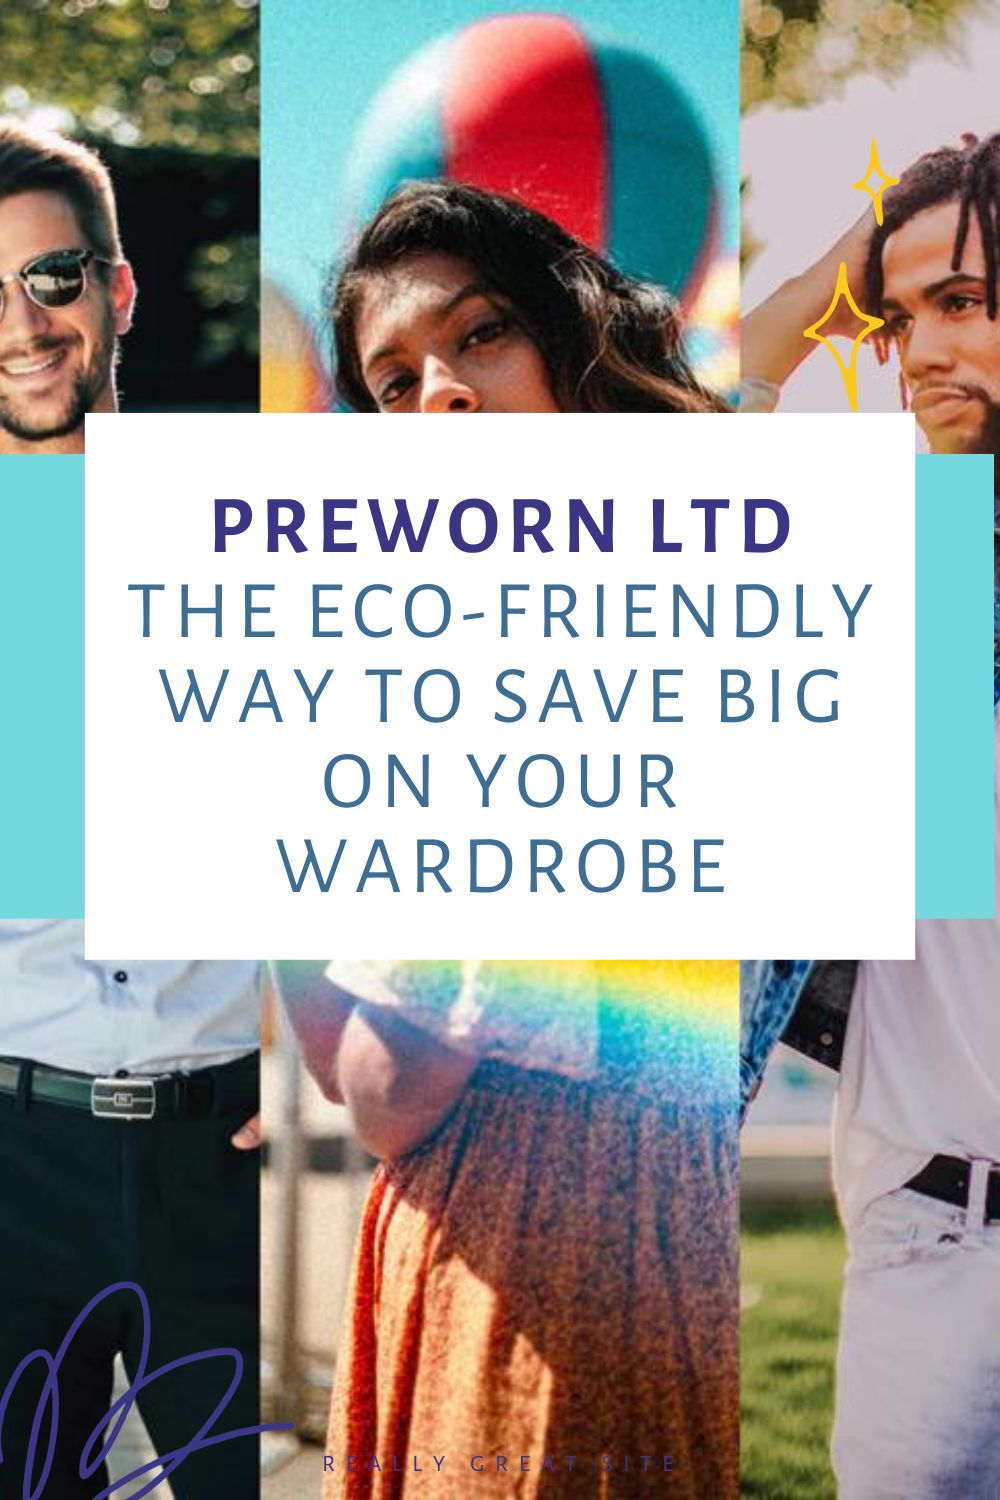 Shop sustainable, affordable fashion at Preworn Ltd, the UK's largest second-hand seller. From £2 to £10, save money while saving the planet. Join the 2B Loved Again scheme for eco-friendly fashion.